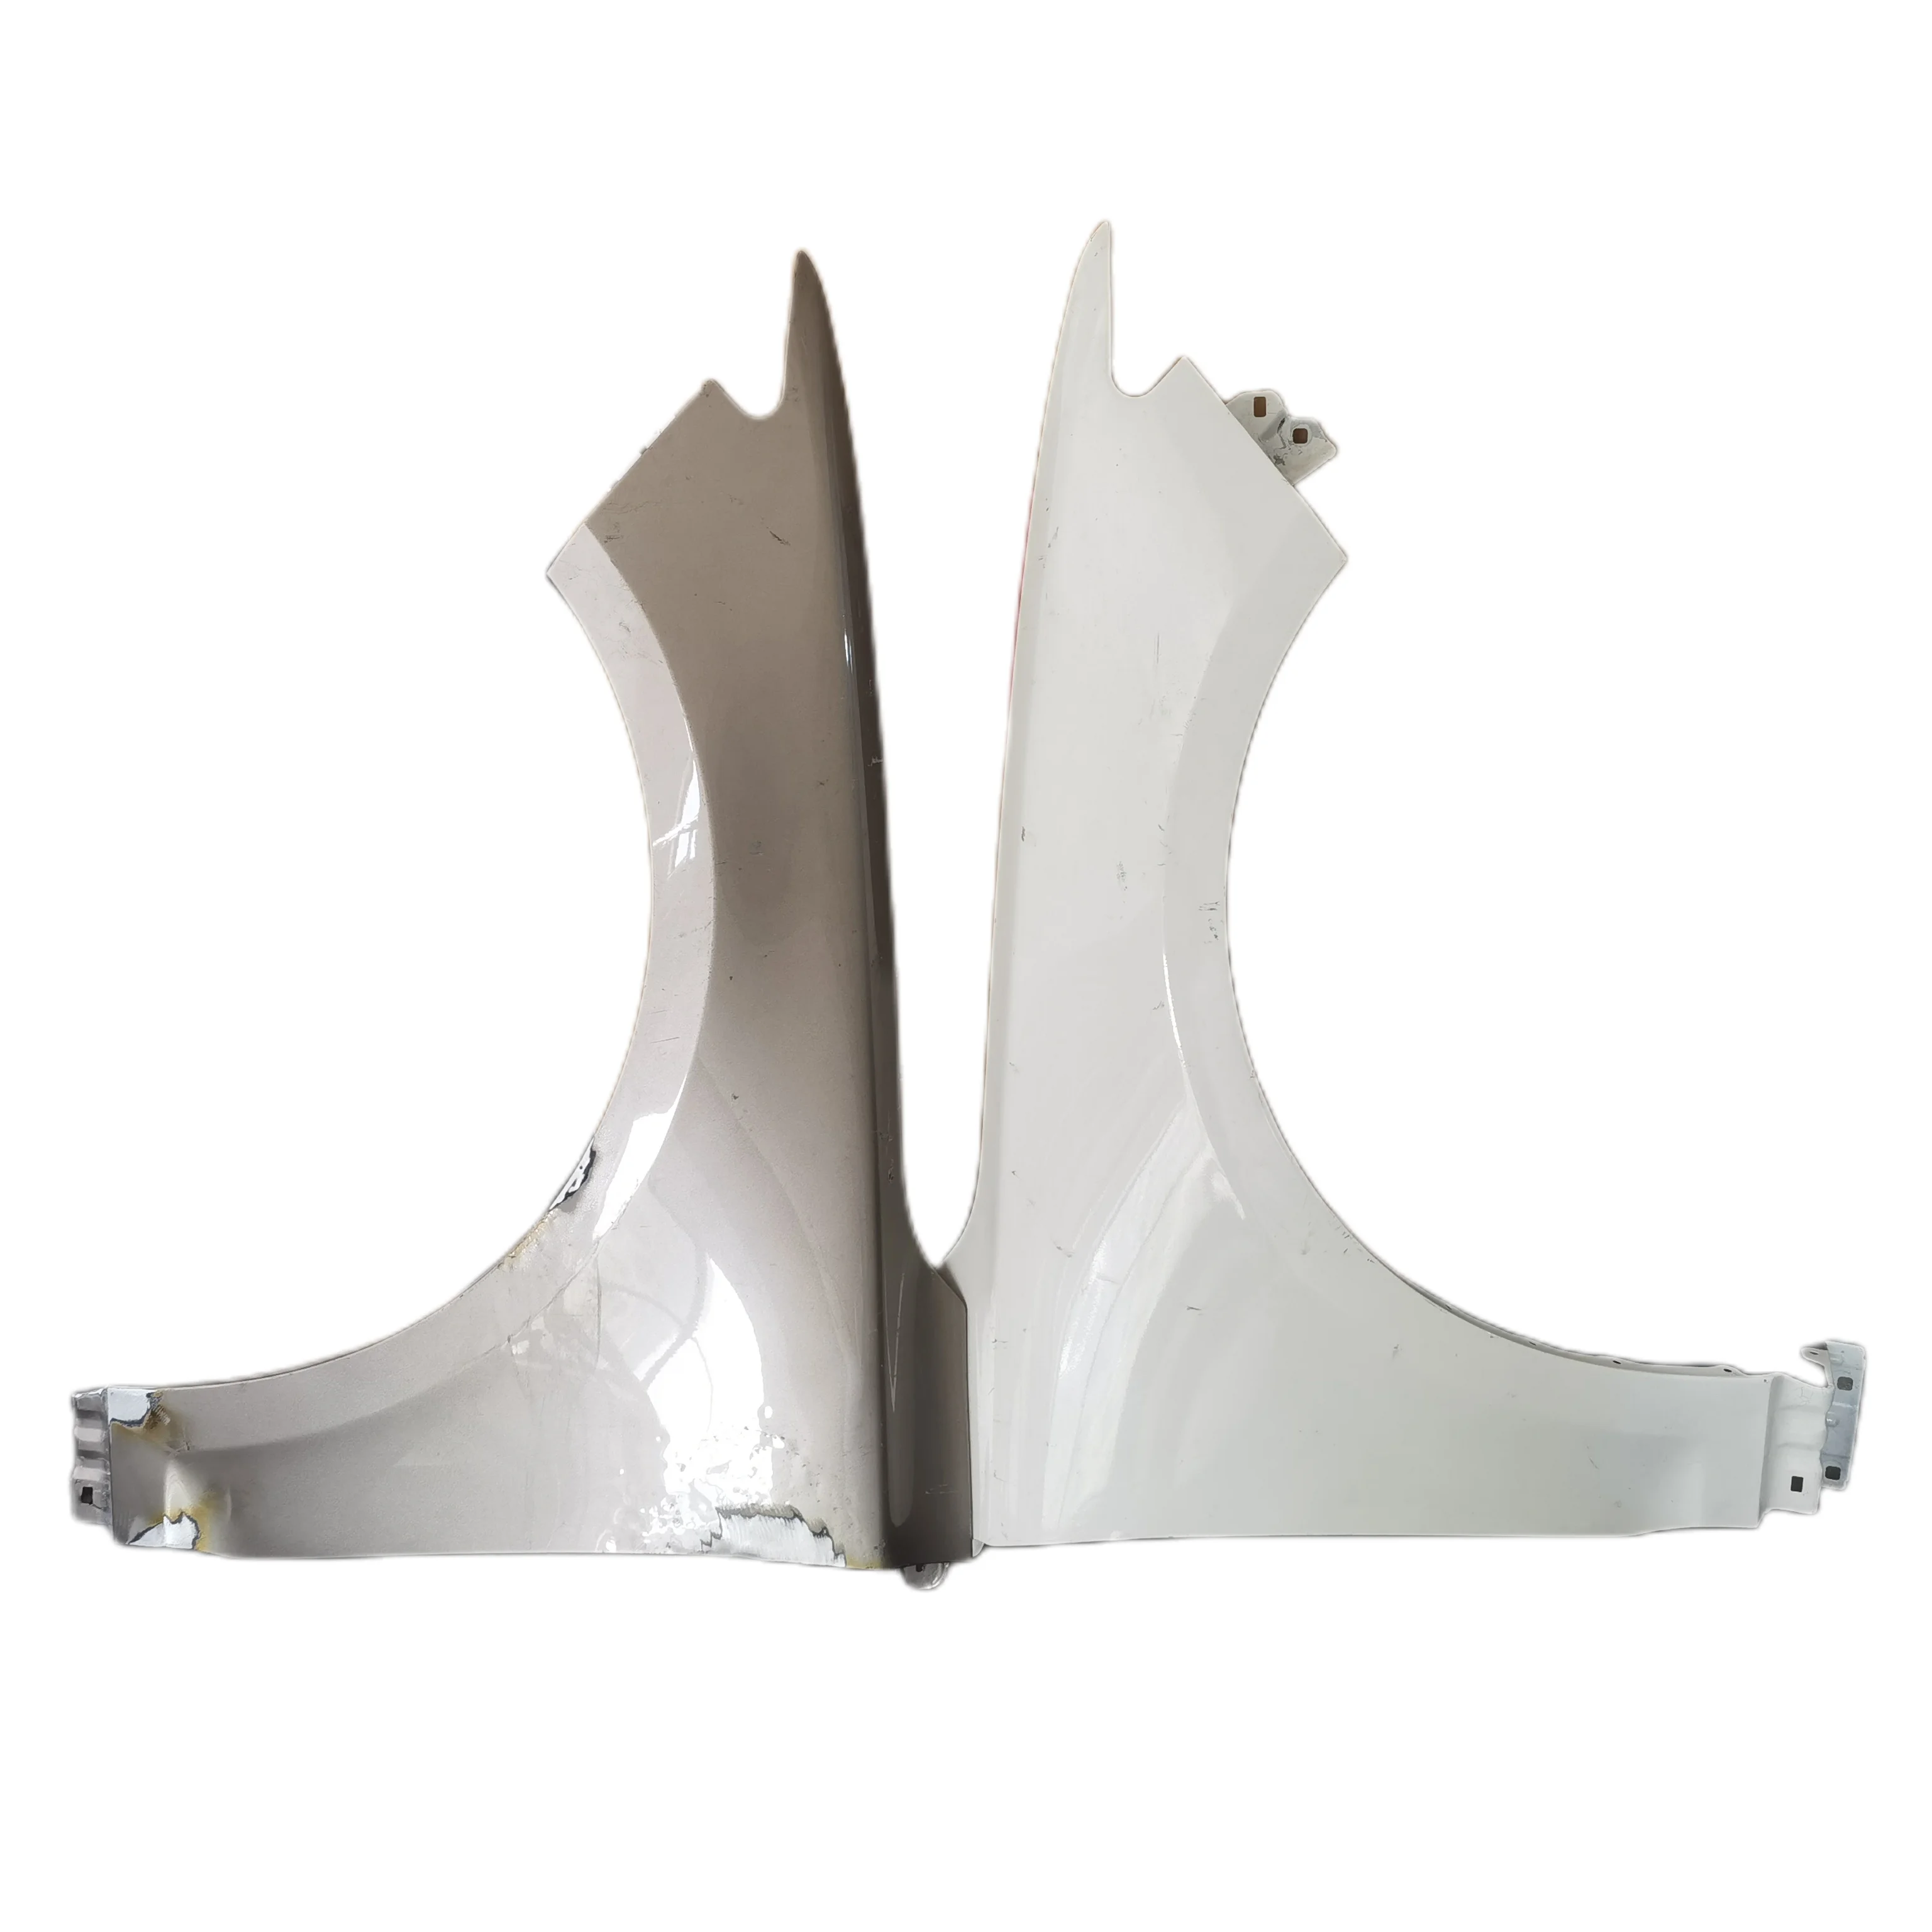 

Lincoln MKZ Front Fender Original Factory Disassembled Parts